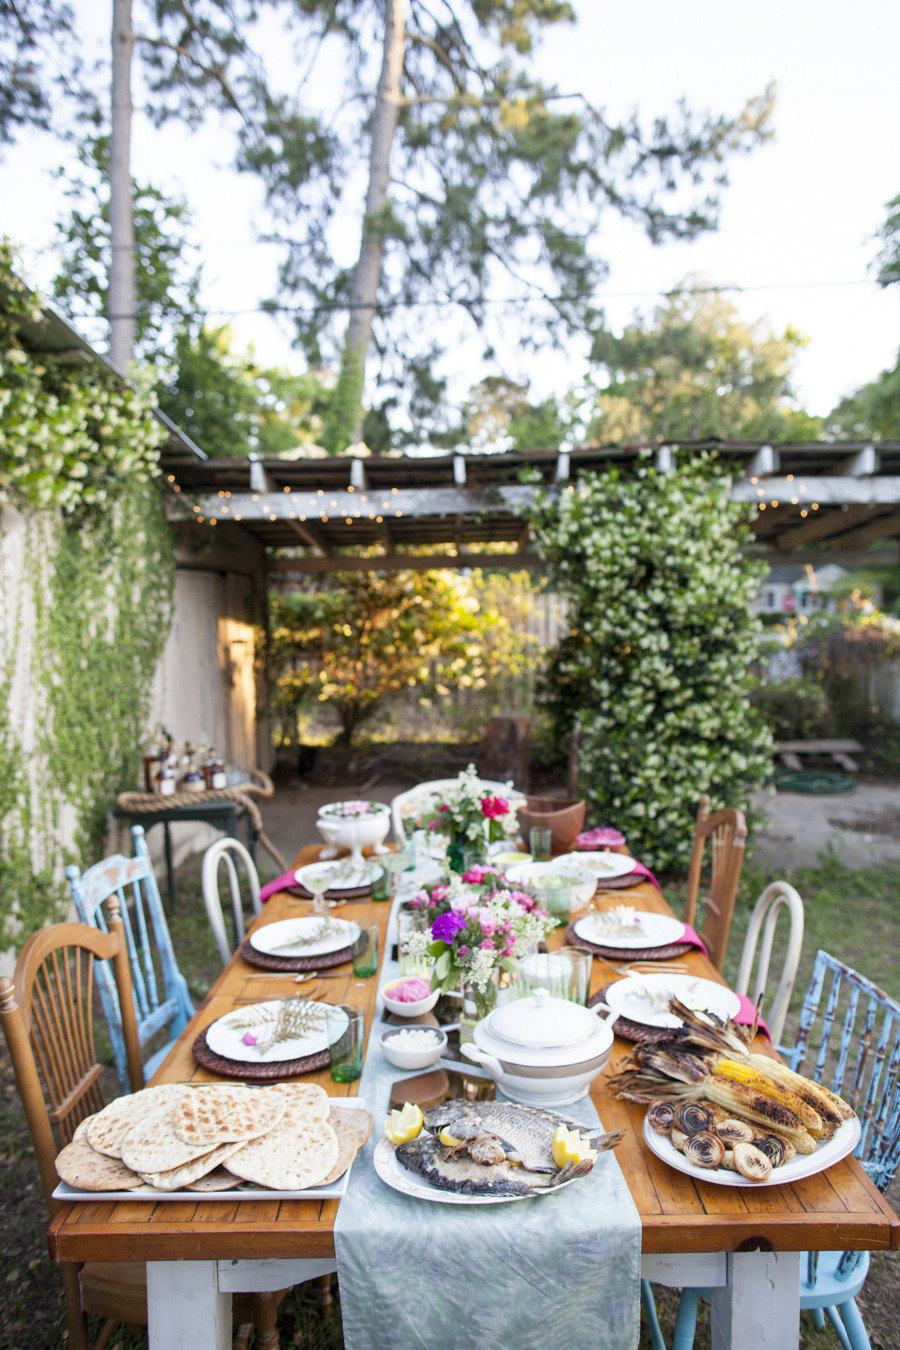 Backyard Dinner Party Ideas
 50 Outdoor Party Ideas You Should Try Out This Summer